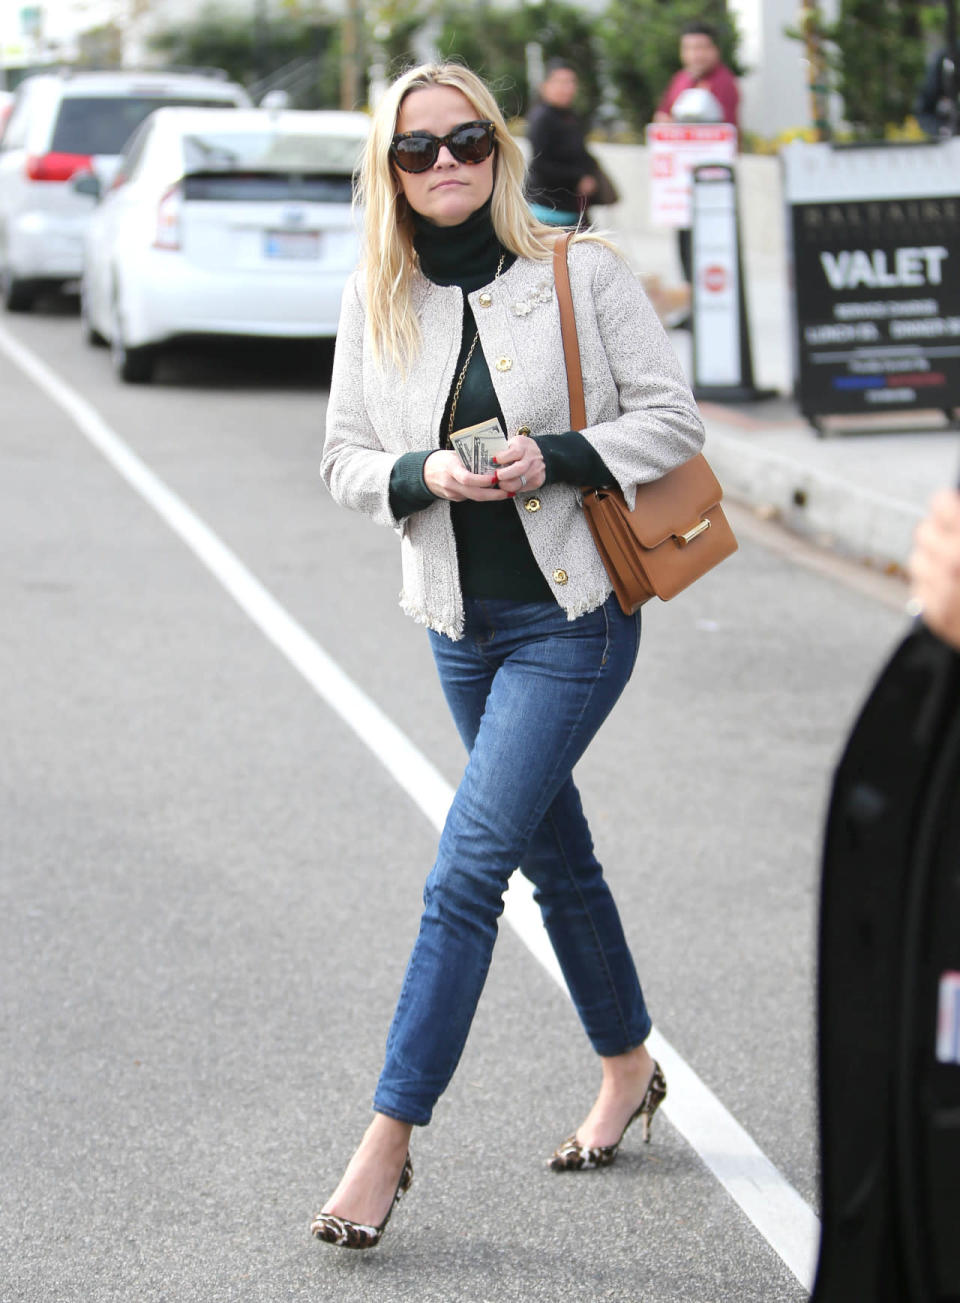 Reese Witherspoon wears a boucle cardigan, green turtleneck, blue jeans, and leopard print pumps on Dec. 10, 2015 in Los Angeles, California.